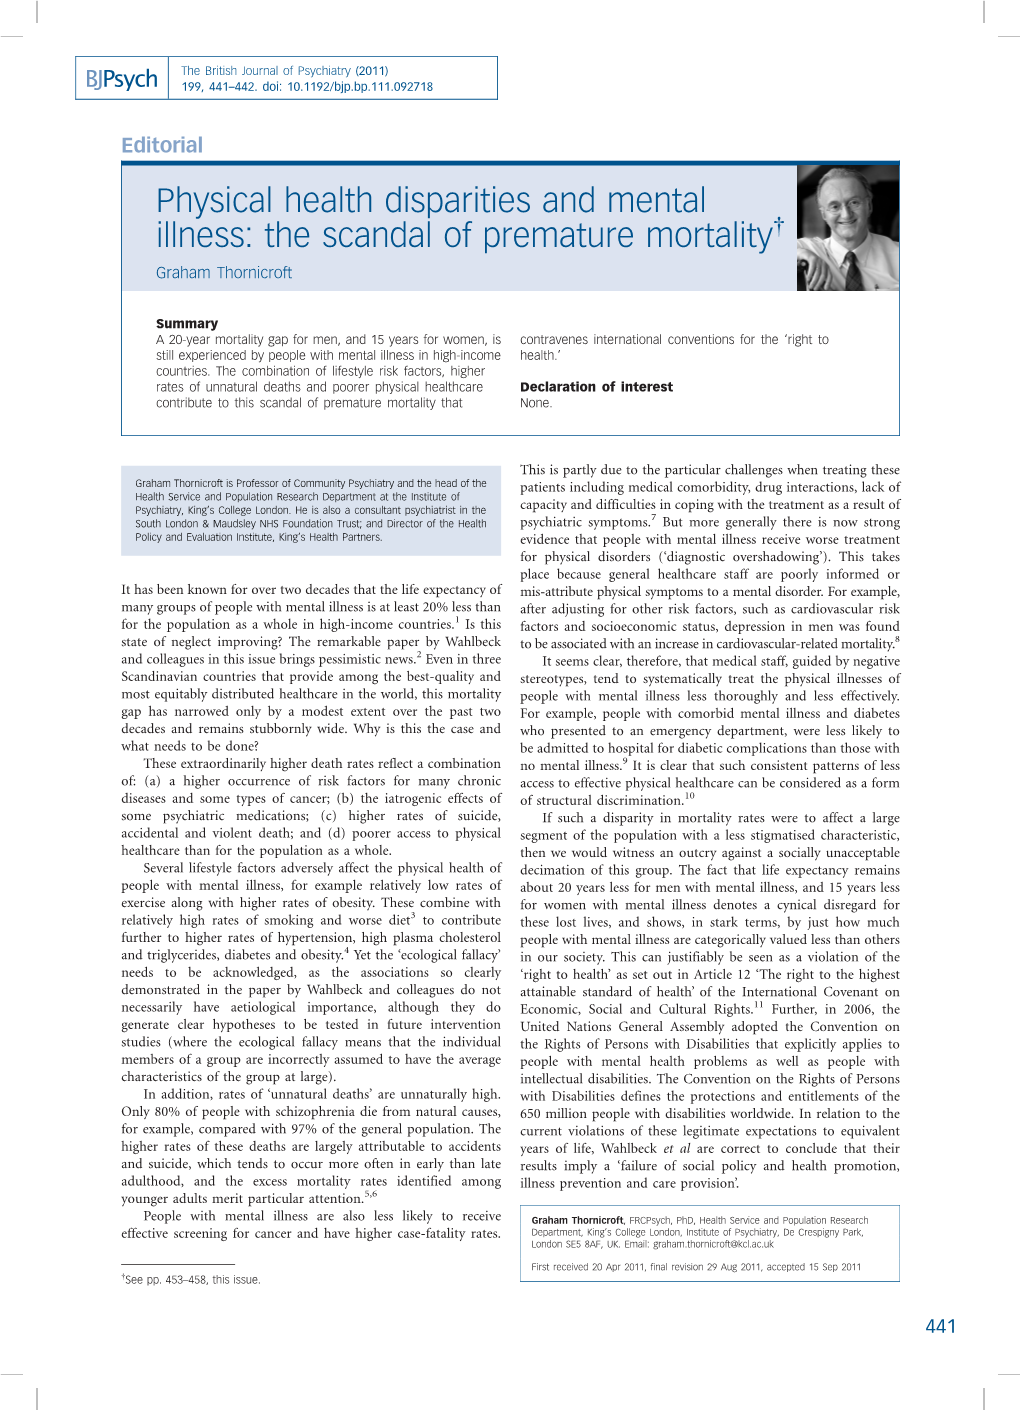 Physical Health Disparities and Mental Illness: the Scandal of Premature Mortality{ Graham Thornicroft